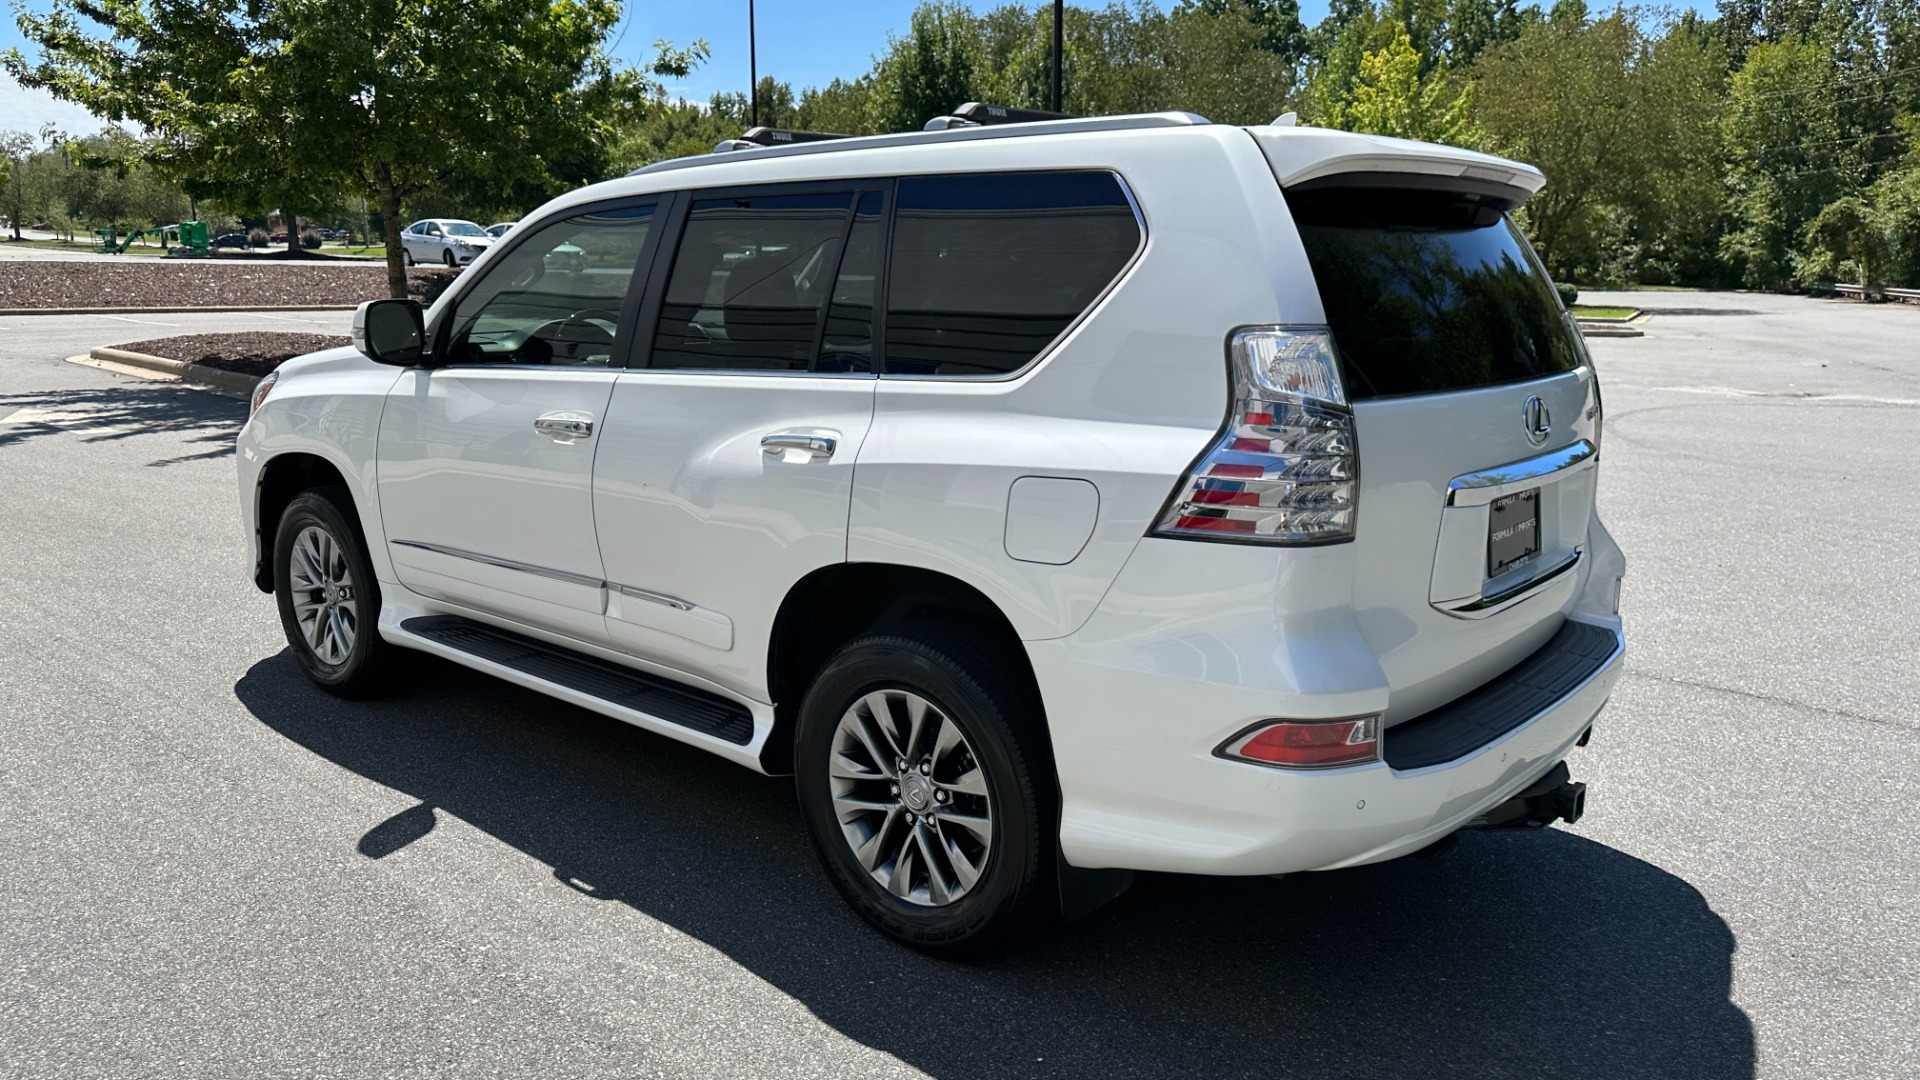 Used 2015 Lexus GX 460 LUXURY / MARK LEVINSON / ADJUSTABLE SUSPENSION / TOW HITCH / 3RD ROW for sale Sold at Formula Imports in Charlotte NC 28227 4